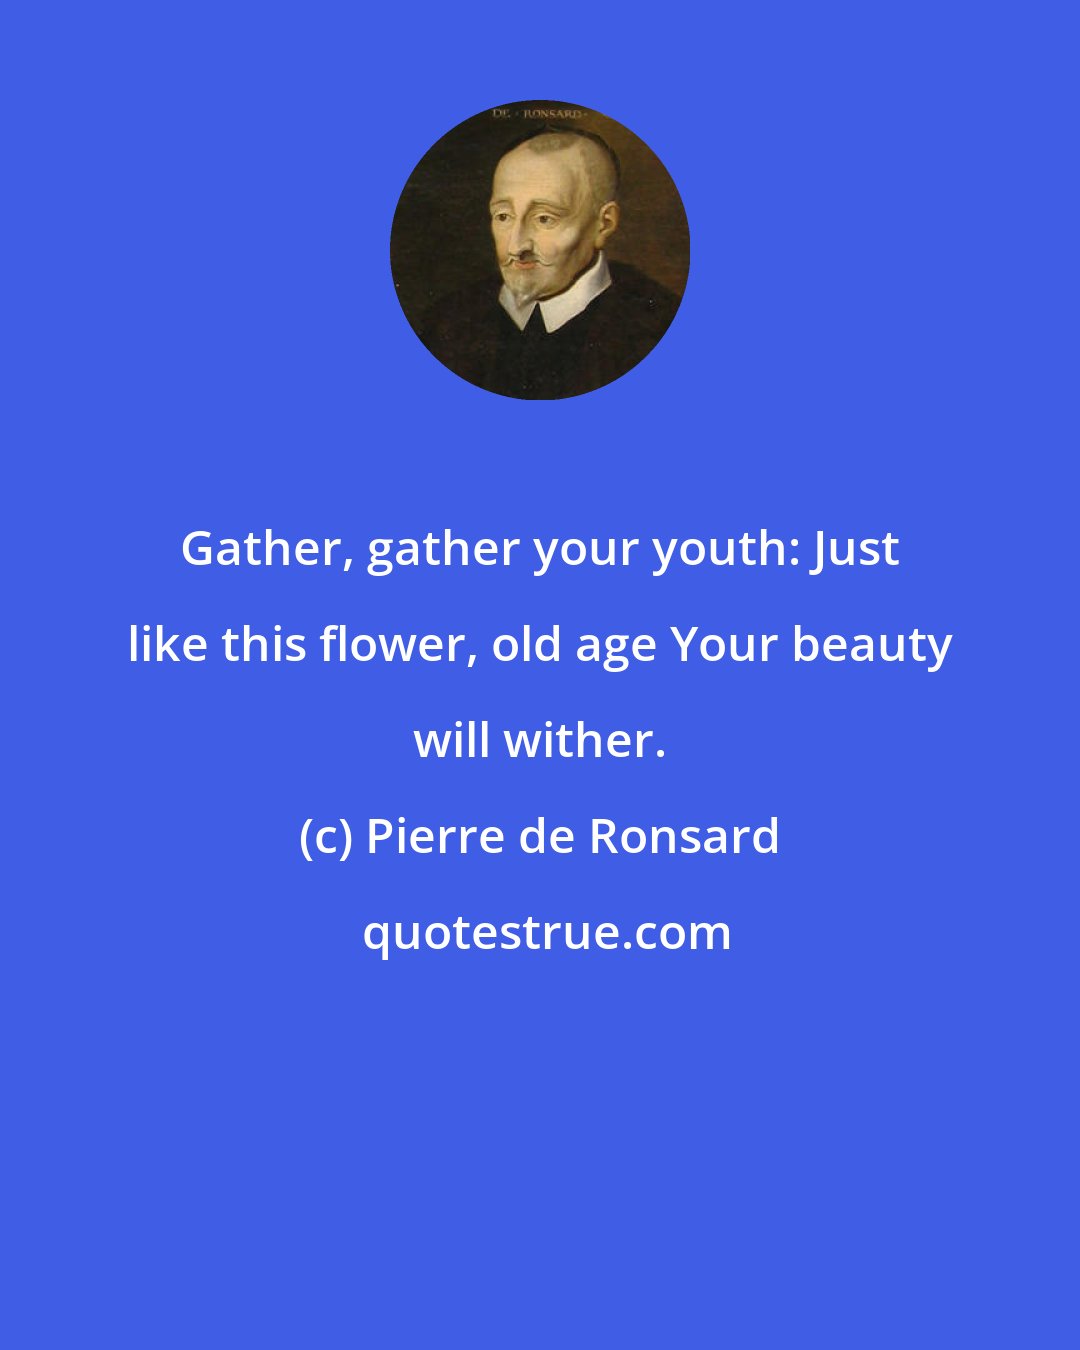 Pierre de Ronsard: Gather, gather your youth: Just like this flower, old age Your beauty will wither.